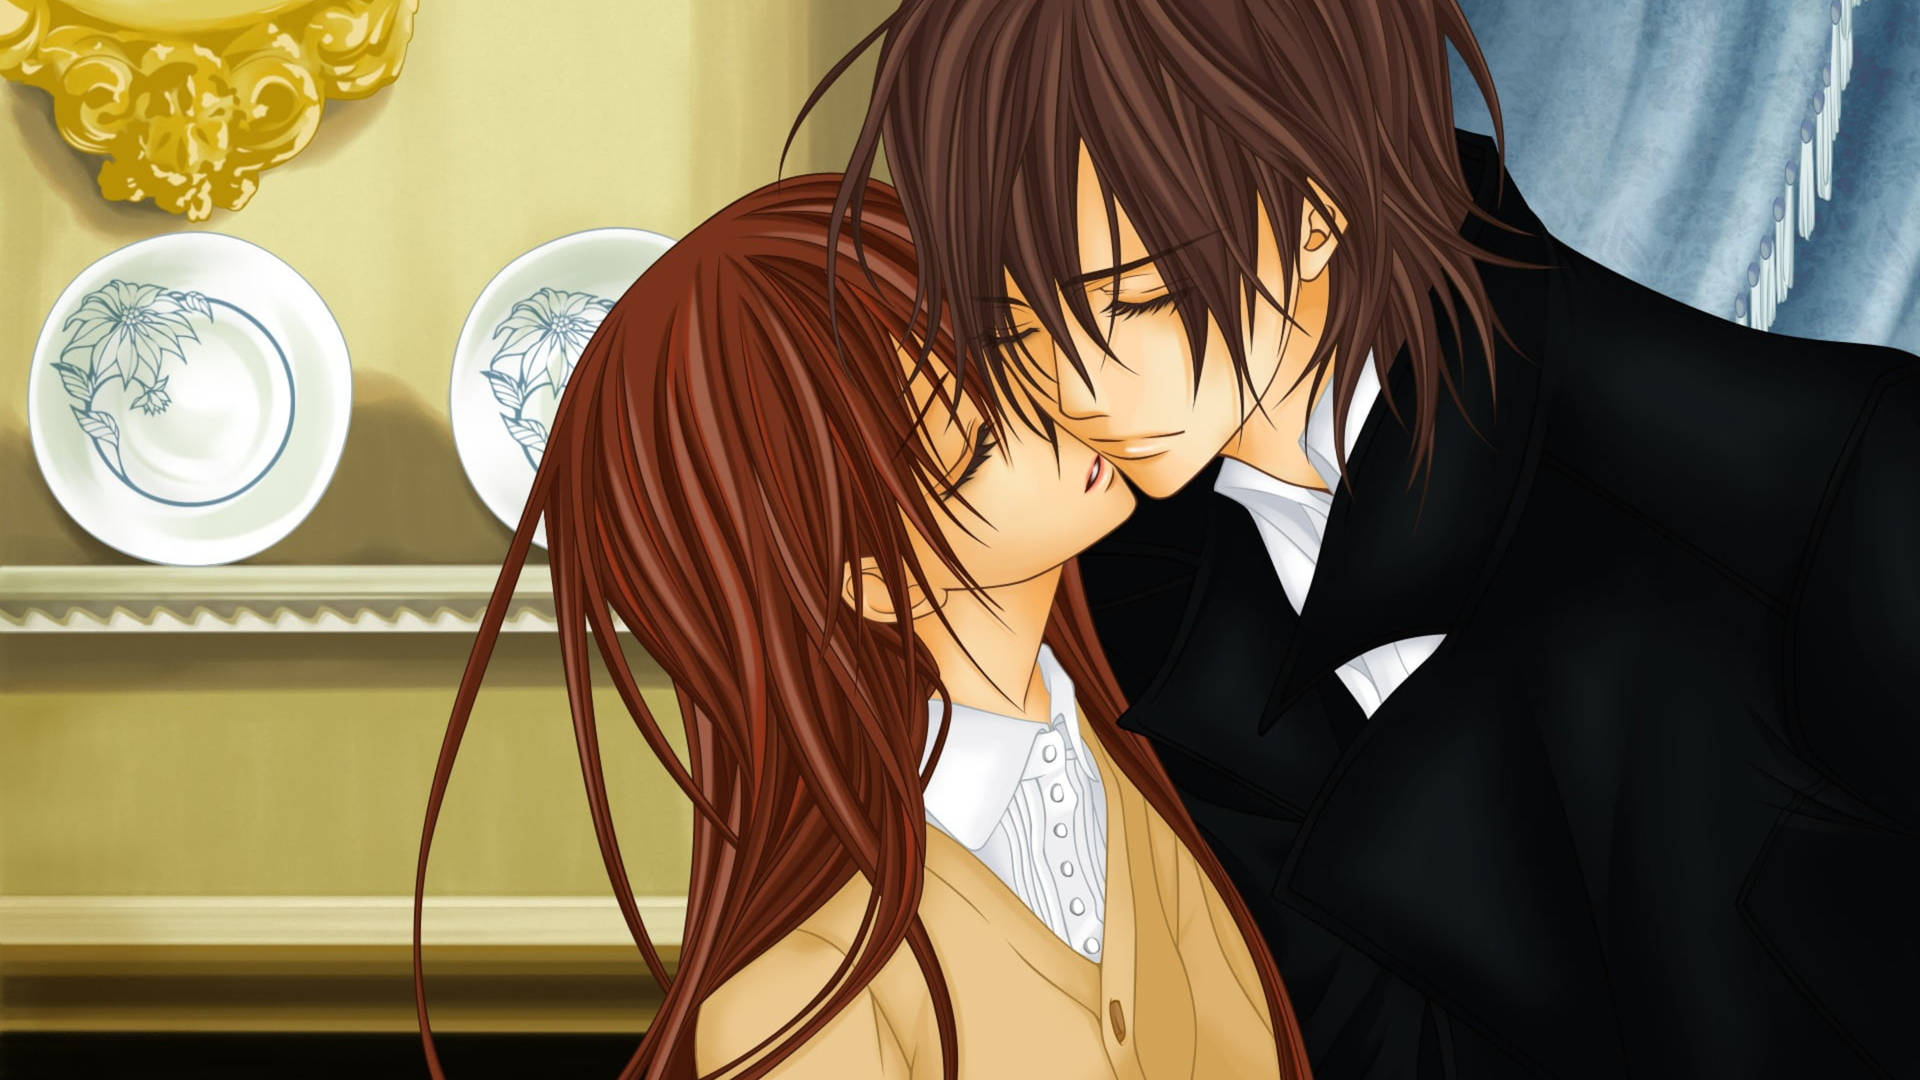 Cute Anime Couple With Brown Hair Background